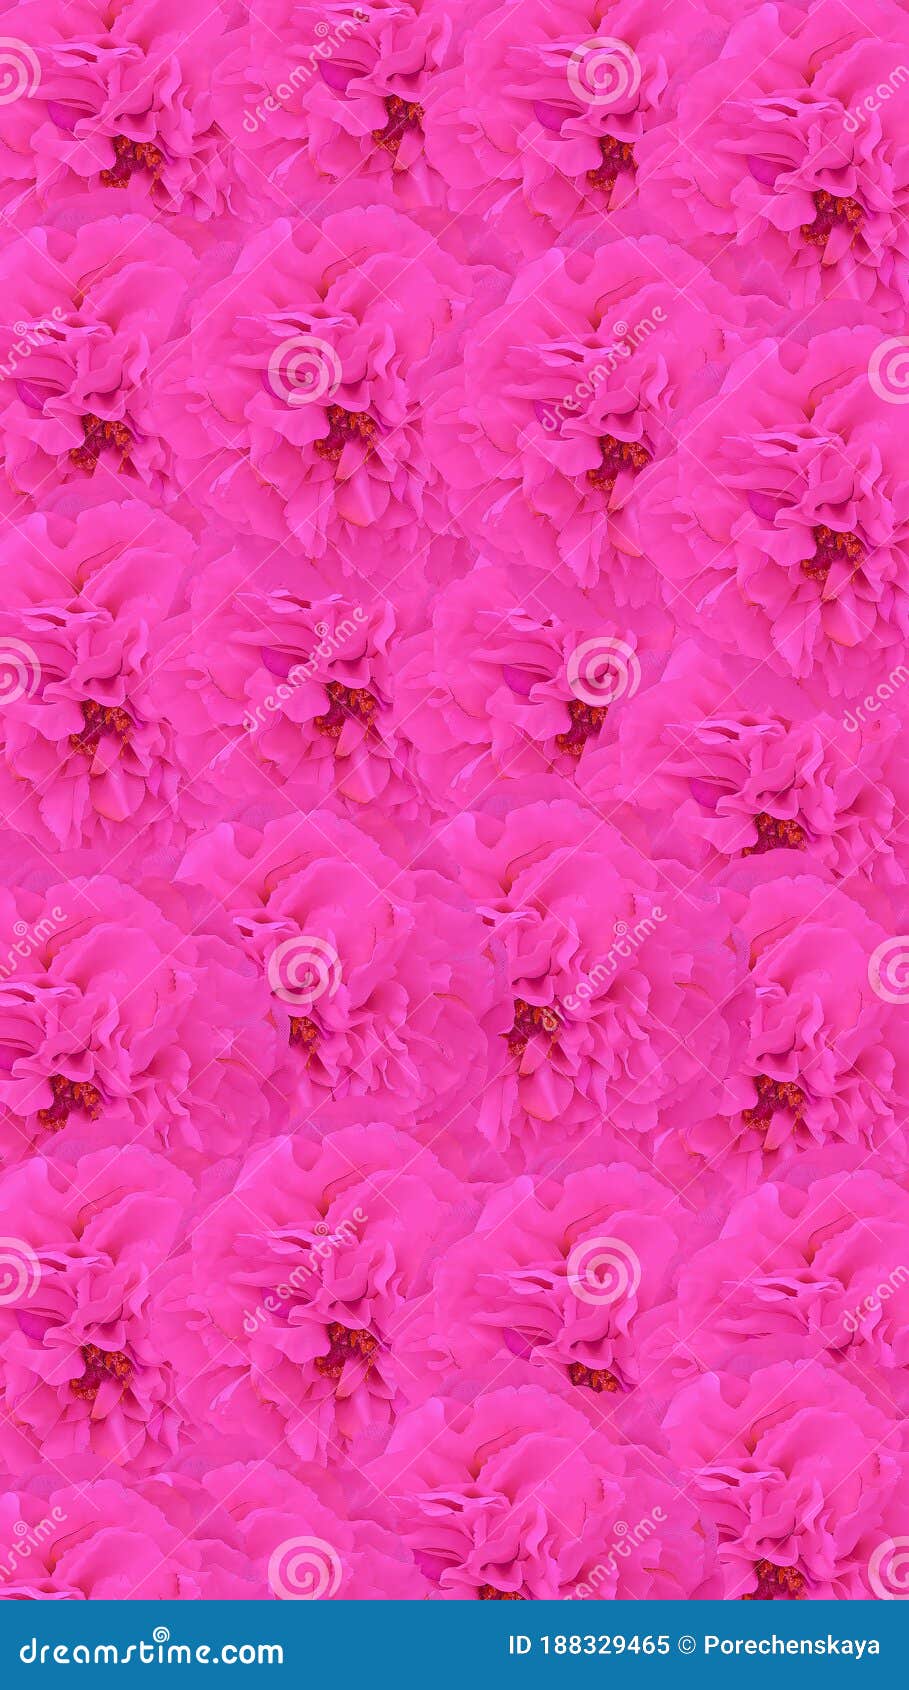 Fashion Aesthetic Wallpaper Phone Pink Flowers Background Stock Image Image Of Bloom Background 188329465